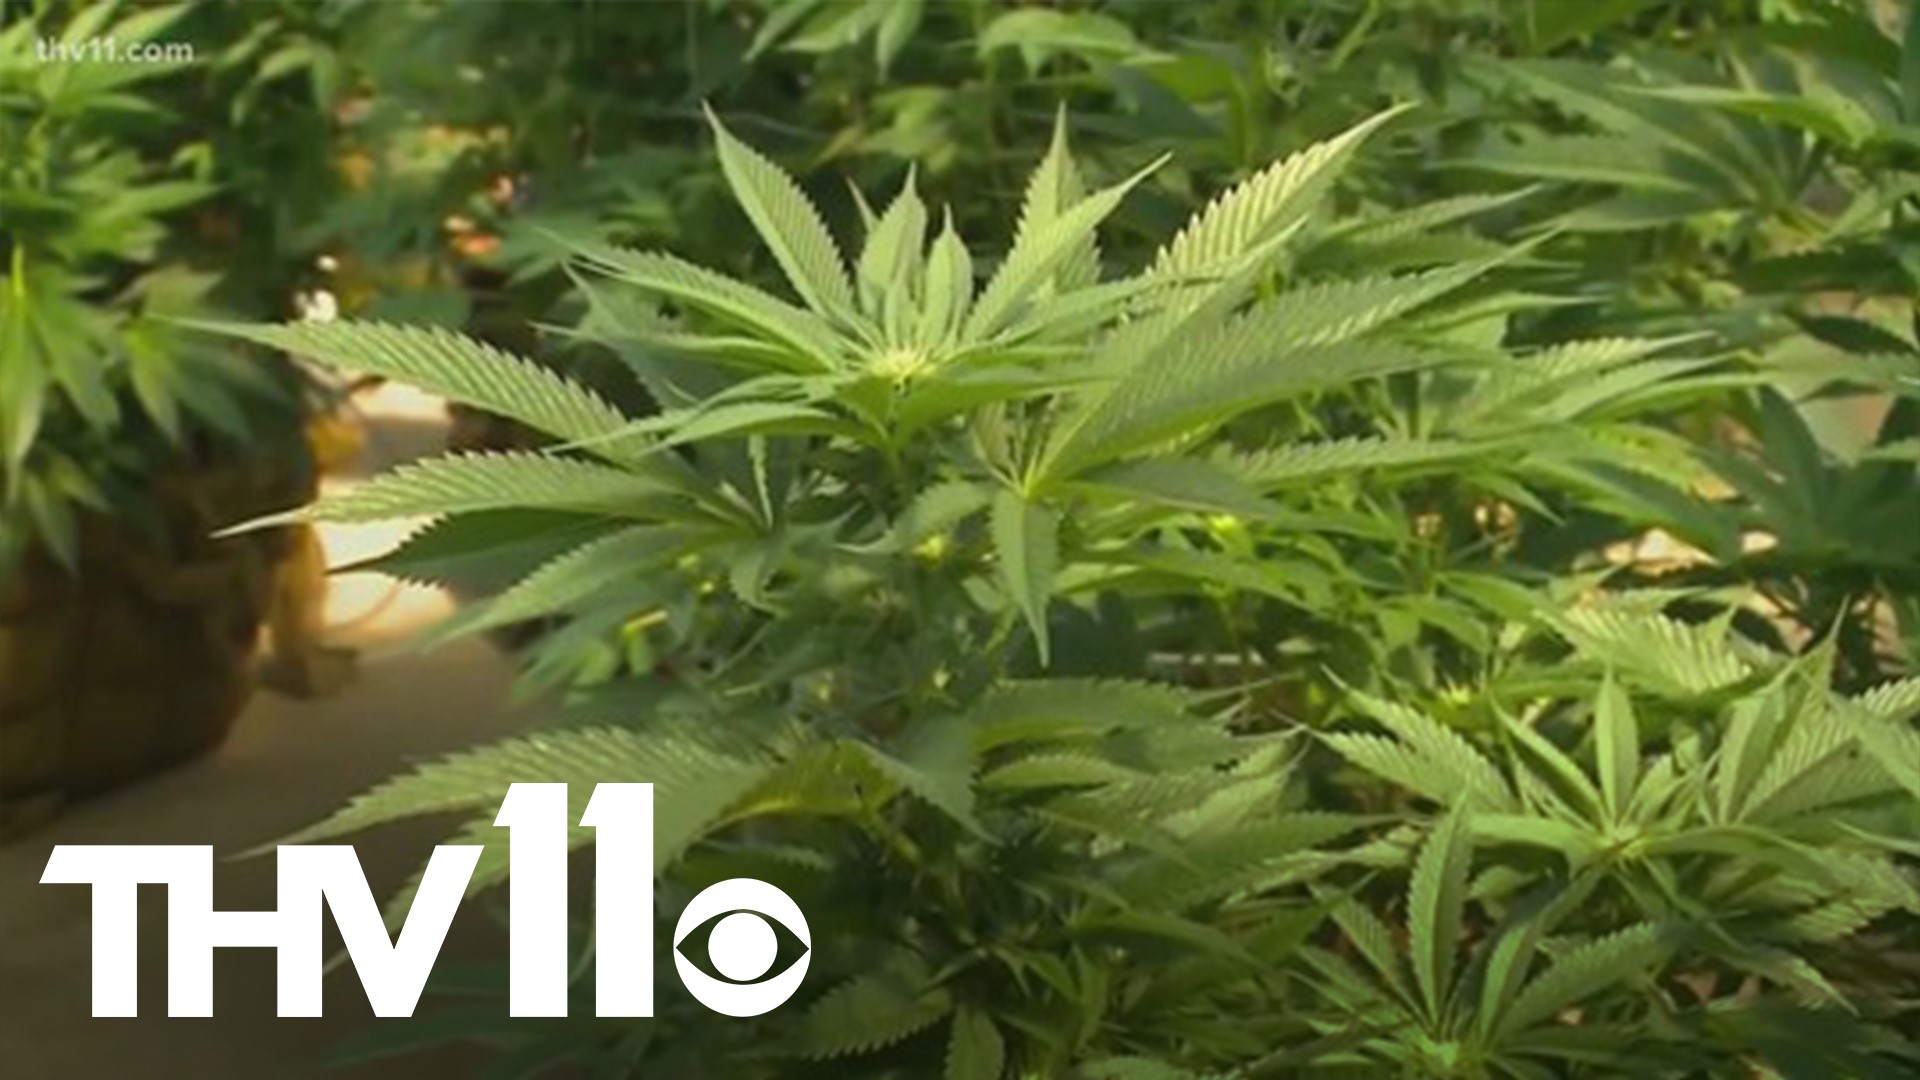 A new poll shows a majority of Arkansans are more interested in legalizing marijuana as we head towards the 2022 elections.